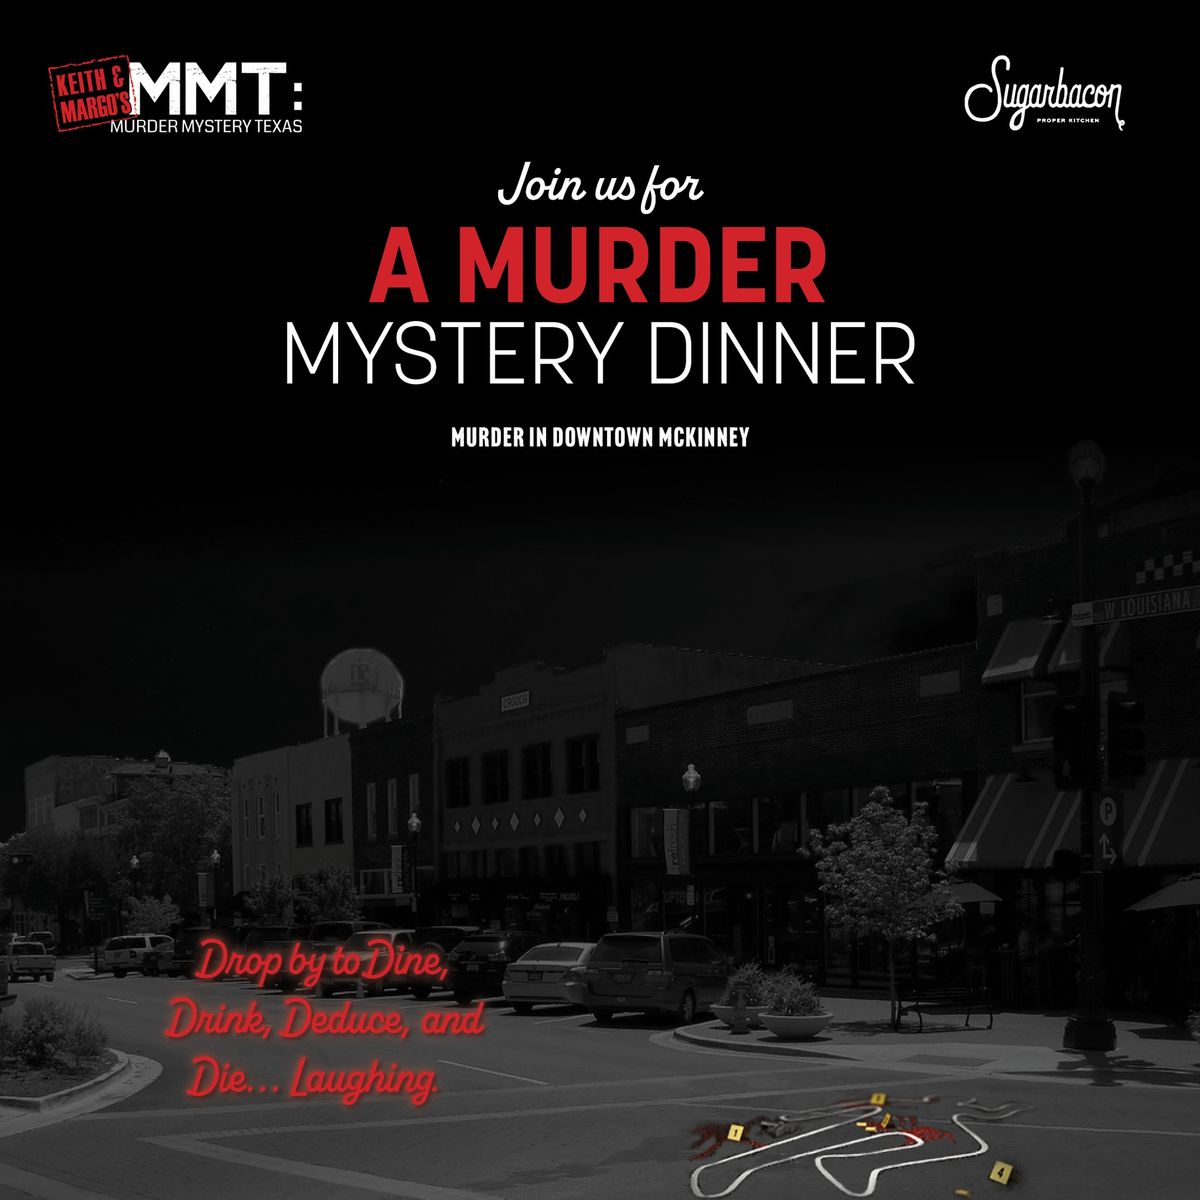 Murder Mystery Dinner at Sugarbacon 